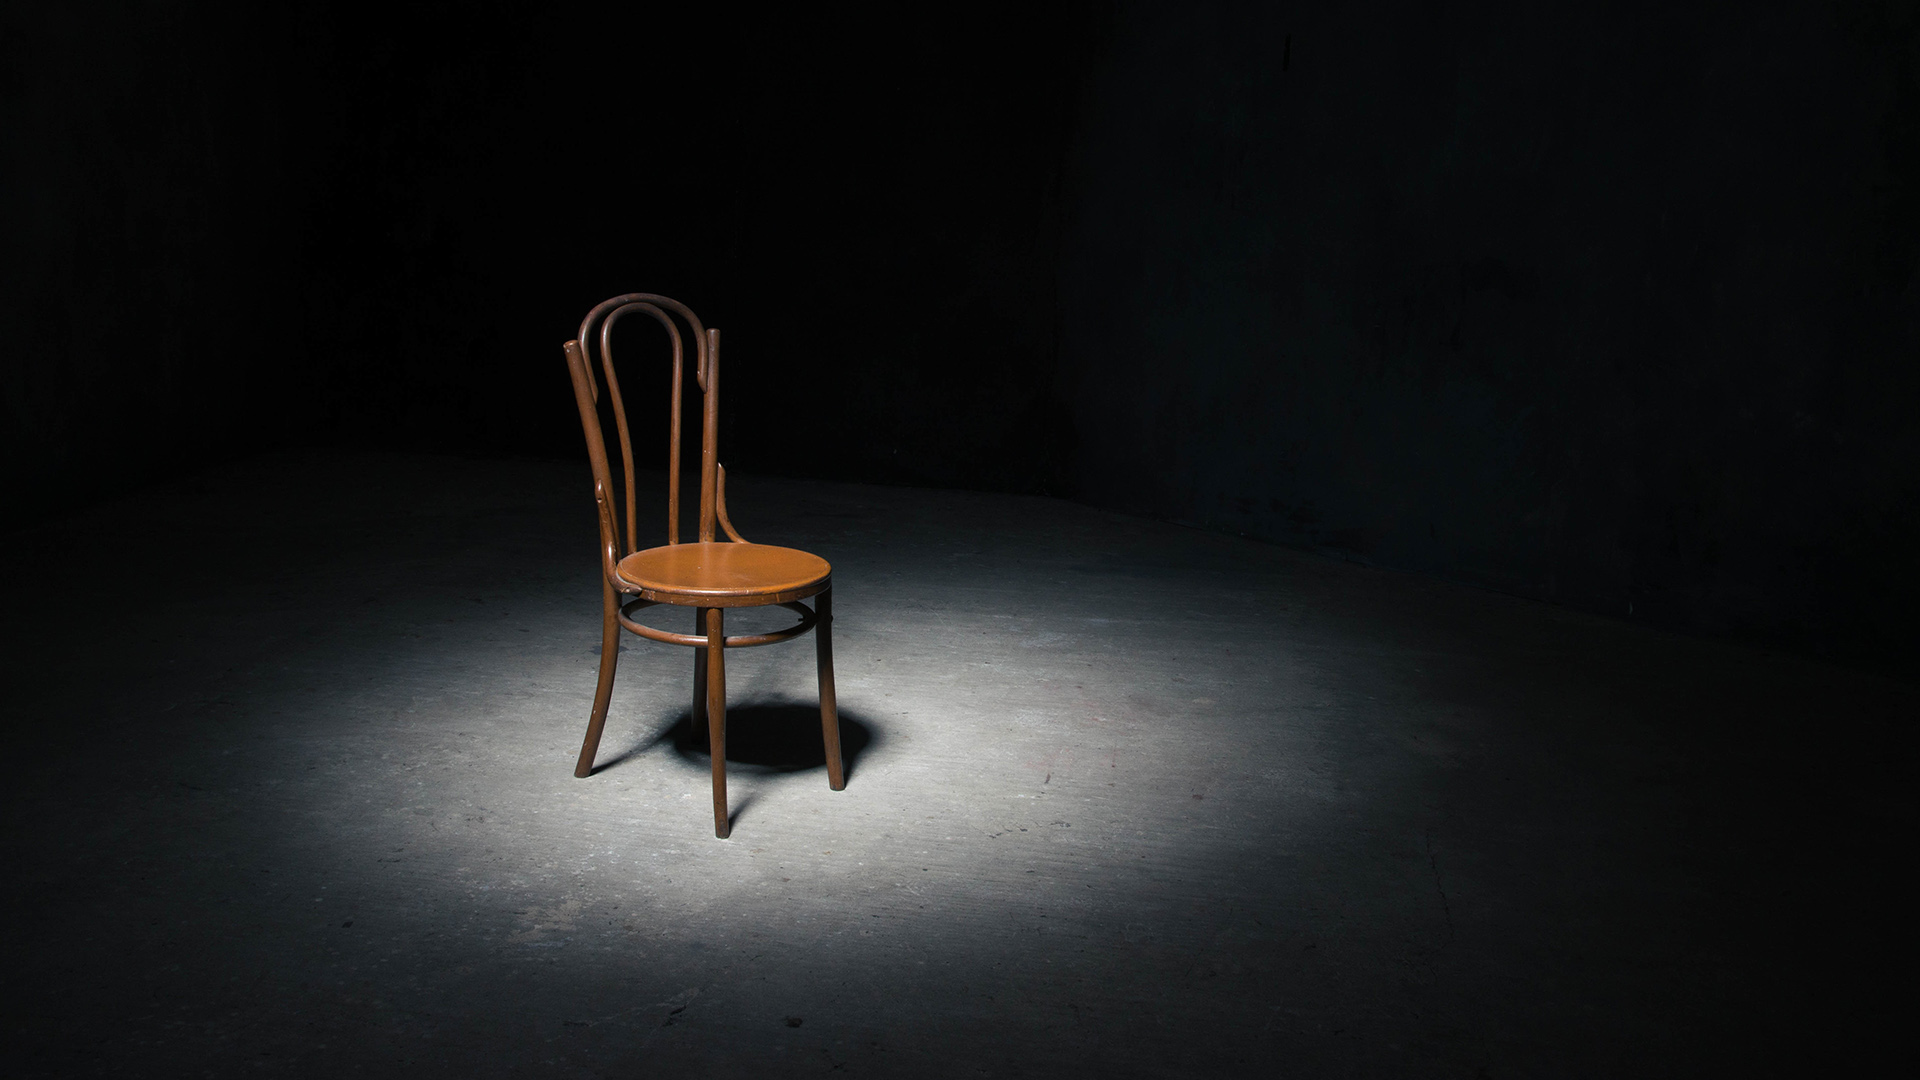 Lonely chair in the spot of light on black background at empty room